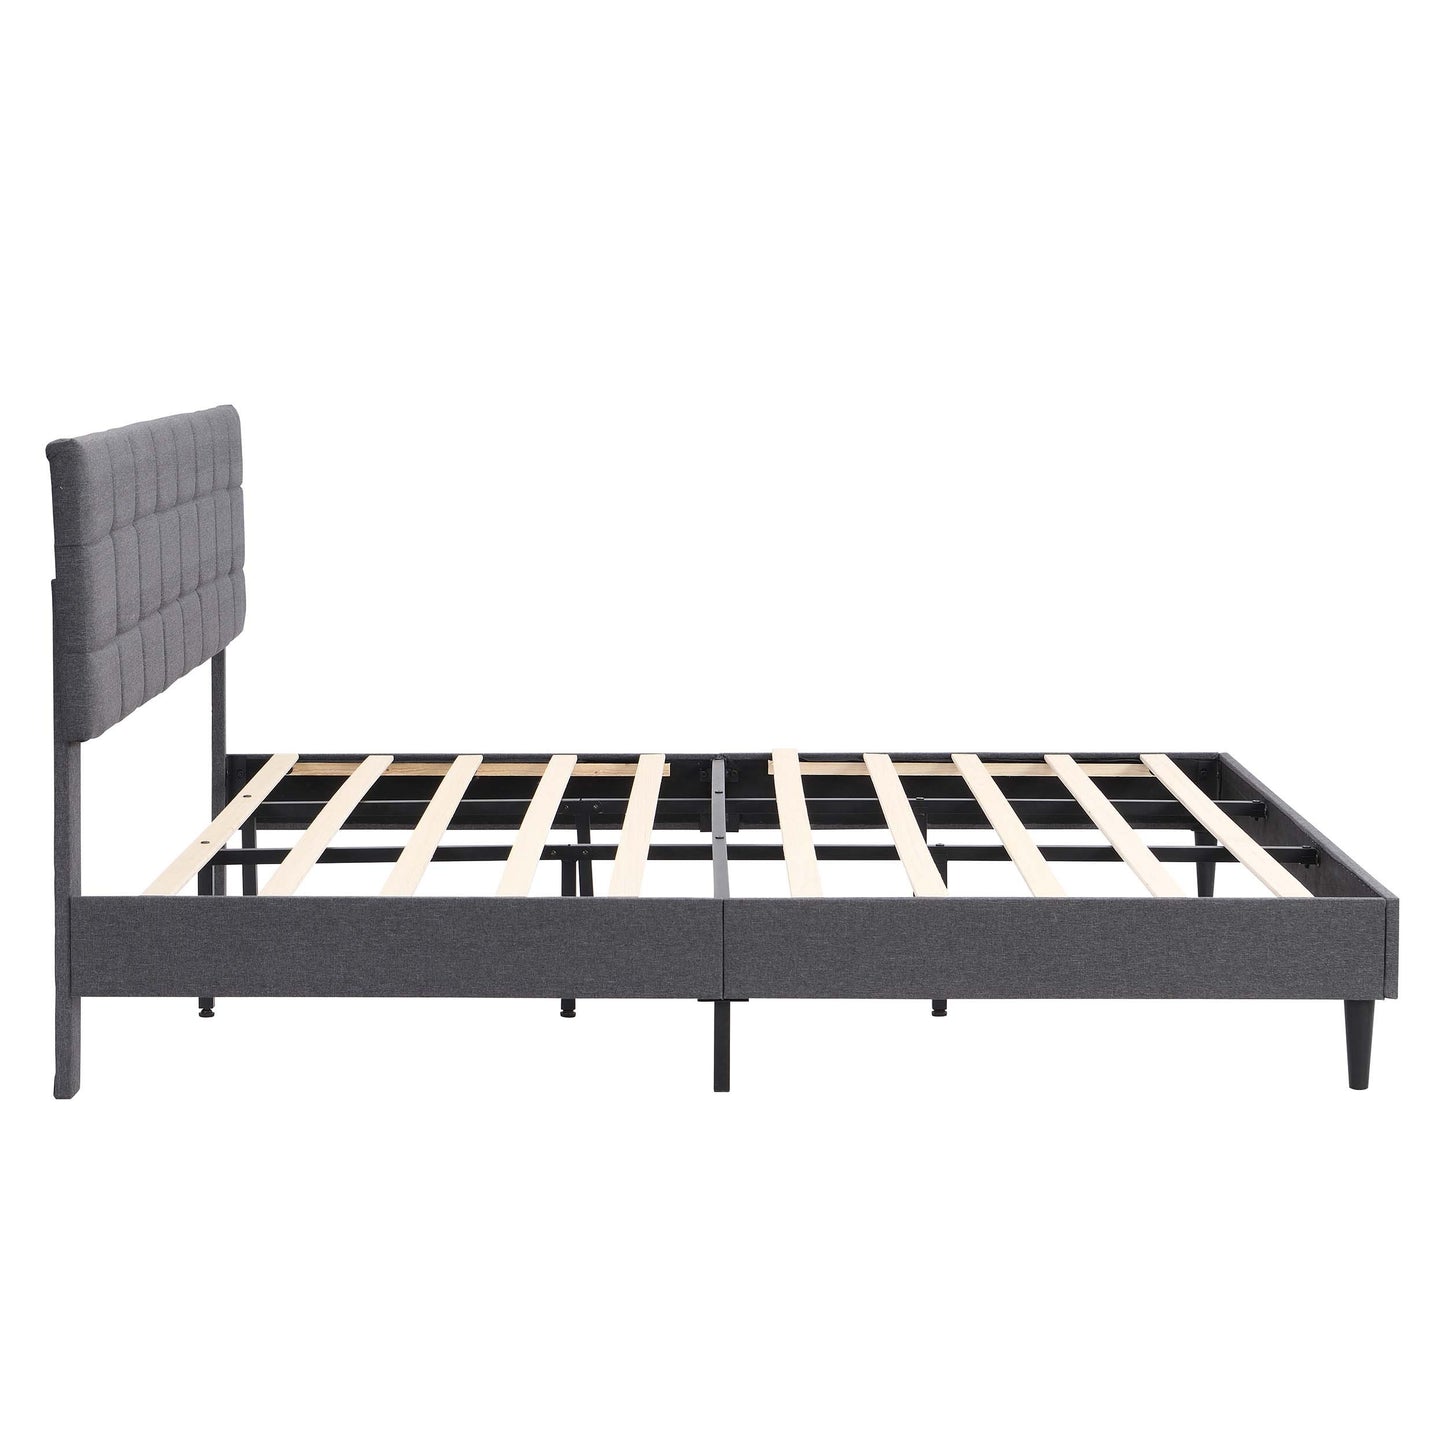 King Size Platform Bed Frame with Fabric Upholstered Headboard and Wooden Slats, No Box Spring Needed/Easy Assembly, Dark Grey